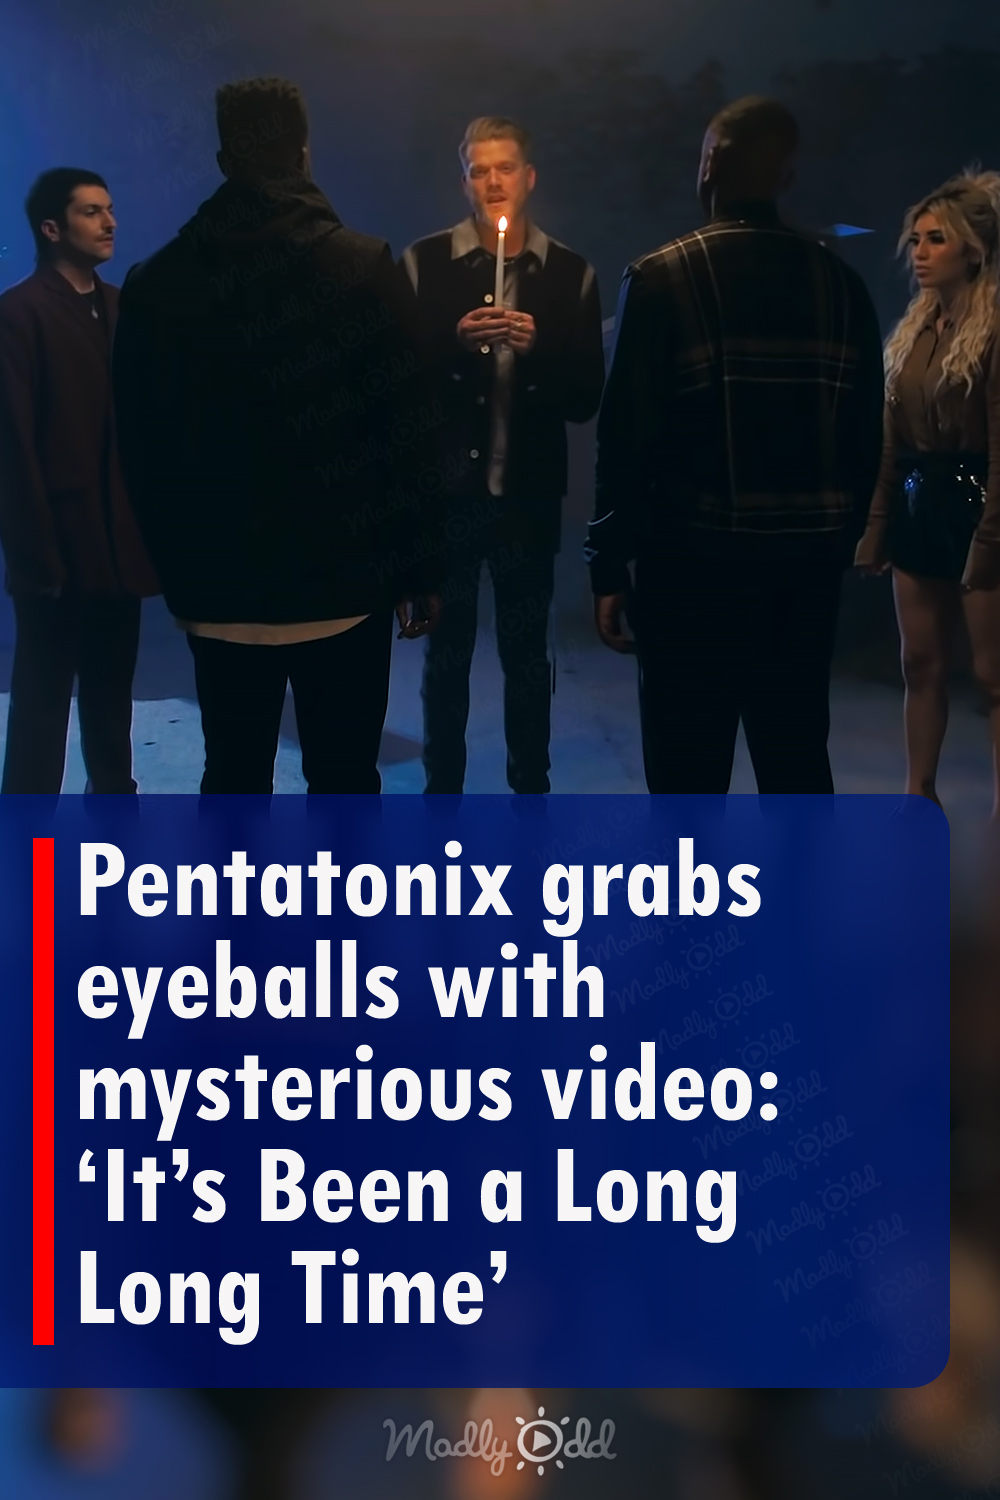 Pentatonix grabs eyeballs with mysterious video: ‘It’s Been a Long Long Time’